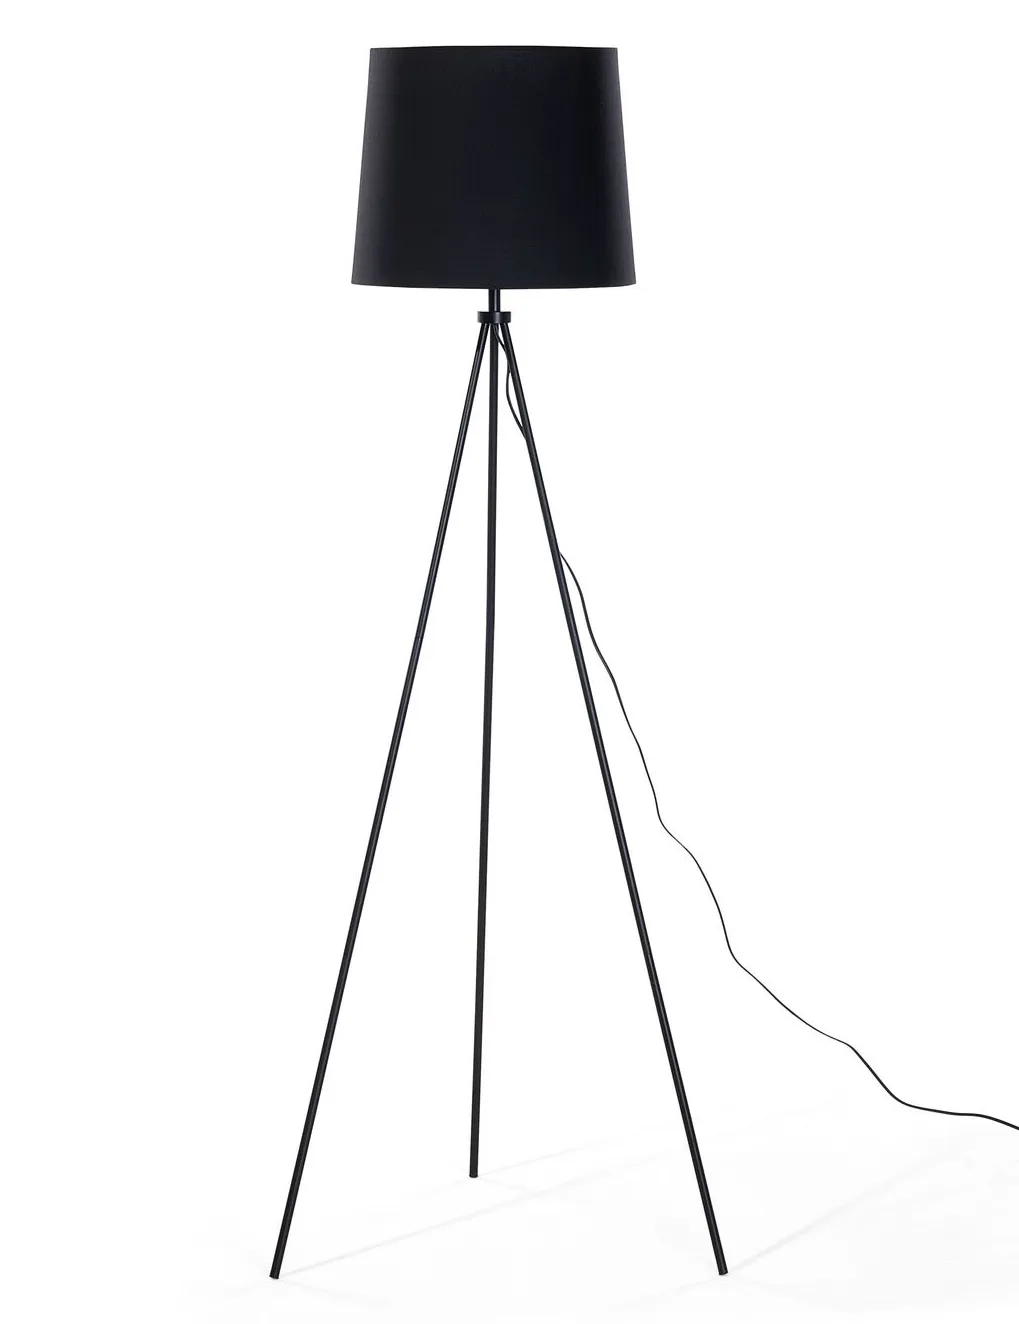 Contemporary Black Tripod Floor Lamp Without Shade Standing Lamp for Living Room Led Iron Floor Lamp